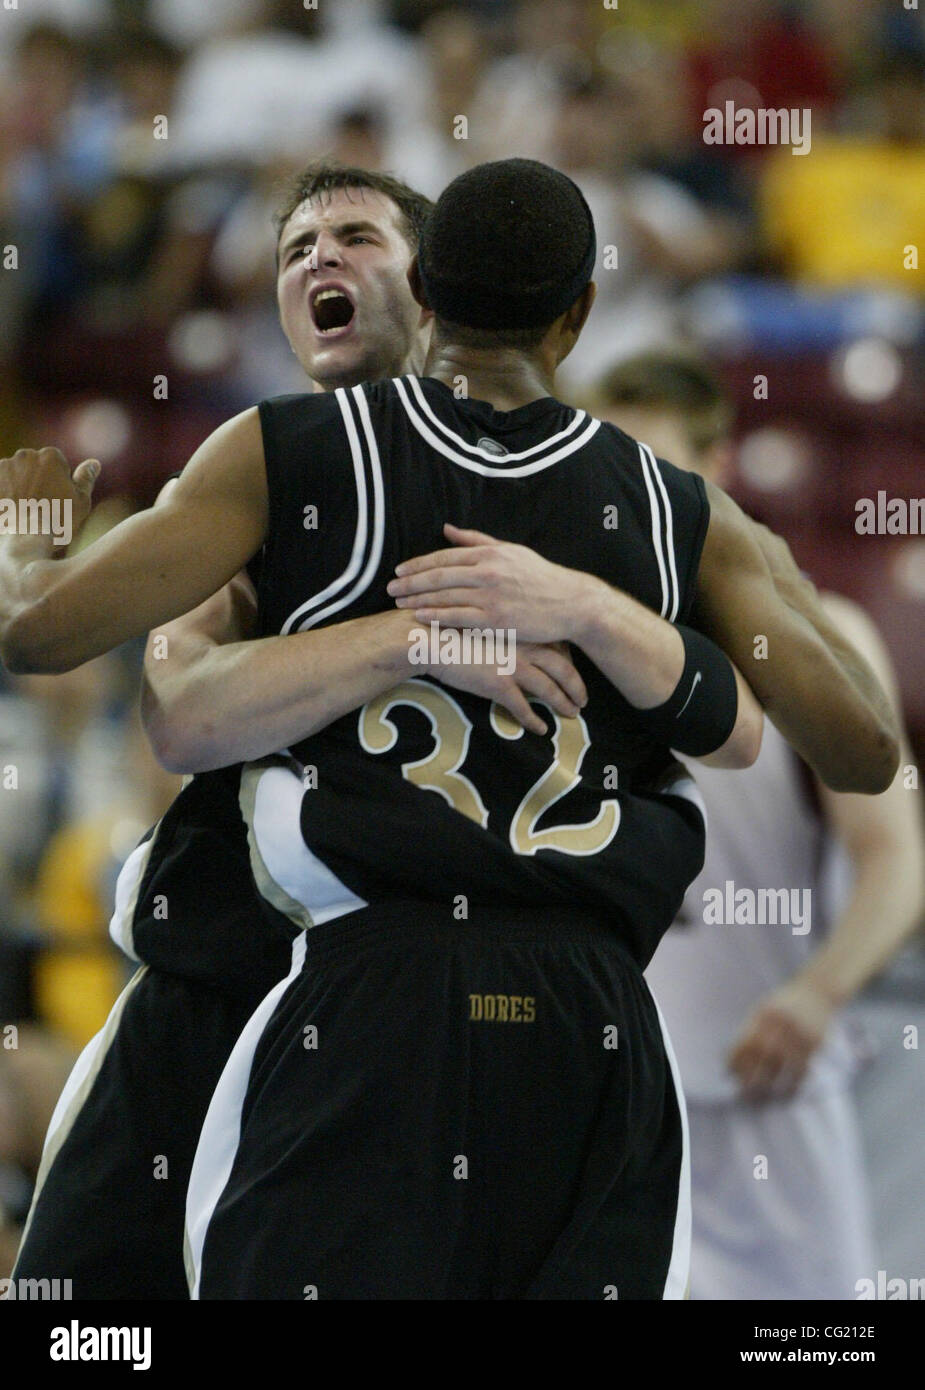 32 for Vanderbilt Shan Foster gets hugged by teammate #20 Dan Cage after  foster hit a three to put into overtime. During the Men's Basketball  Tournament at Arco Arena, Sacramento, Calif. Saturday,